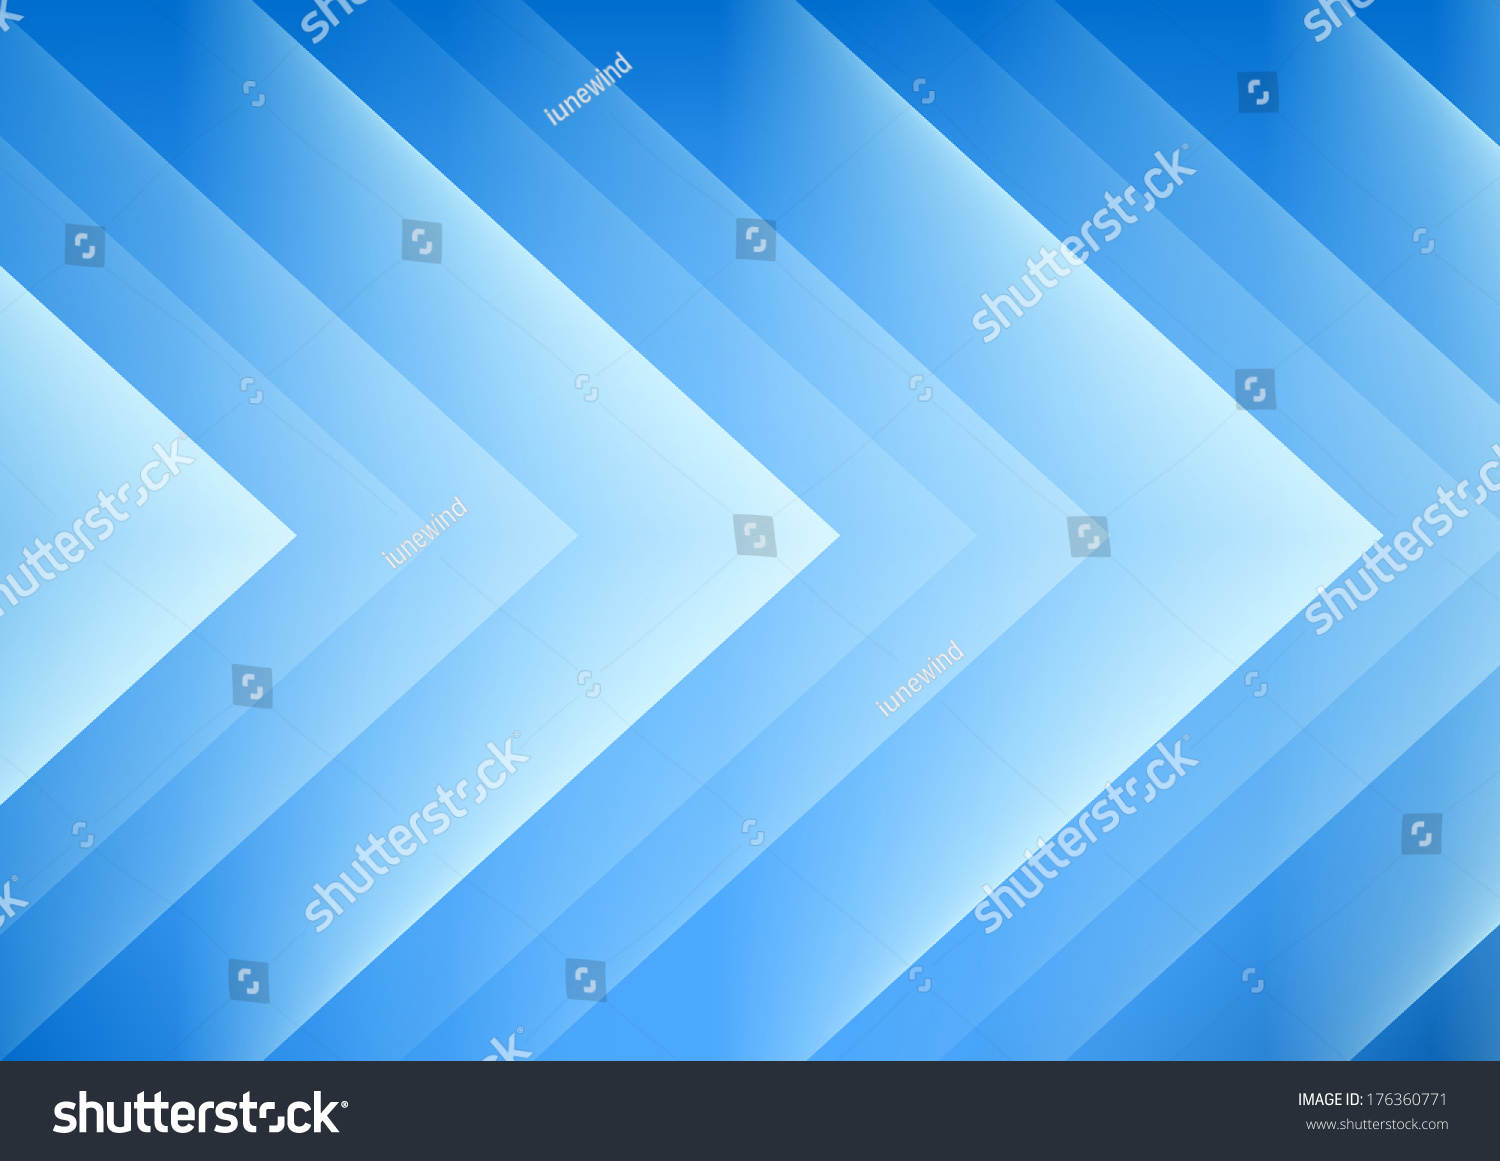 SVG of Abstract blue arrows background for presentation svg